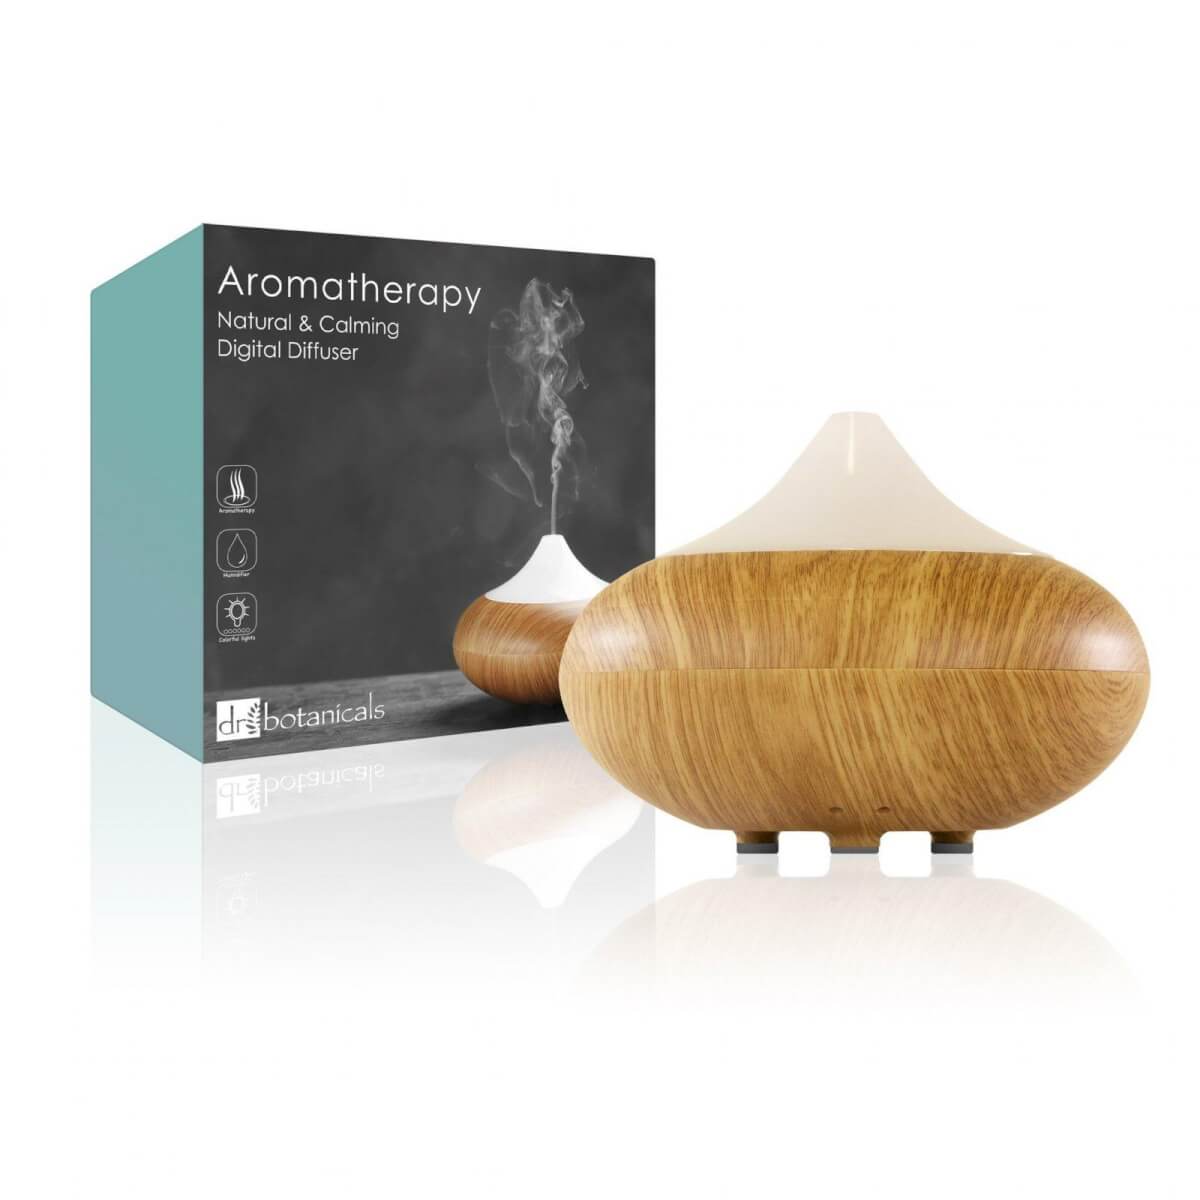 DrDr Botanicals Wooden Aroma Diffuser with a uplifting Moroccan Rose Diffuser Oil Natural and Calming Digital Diffuser